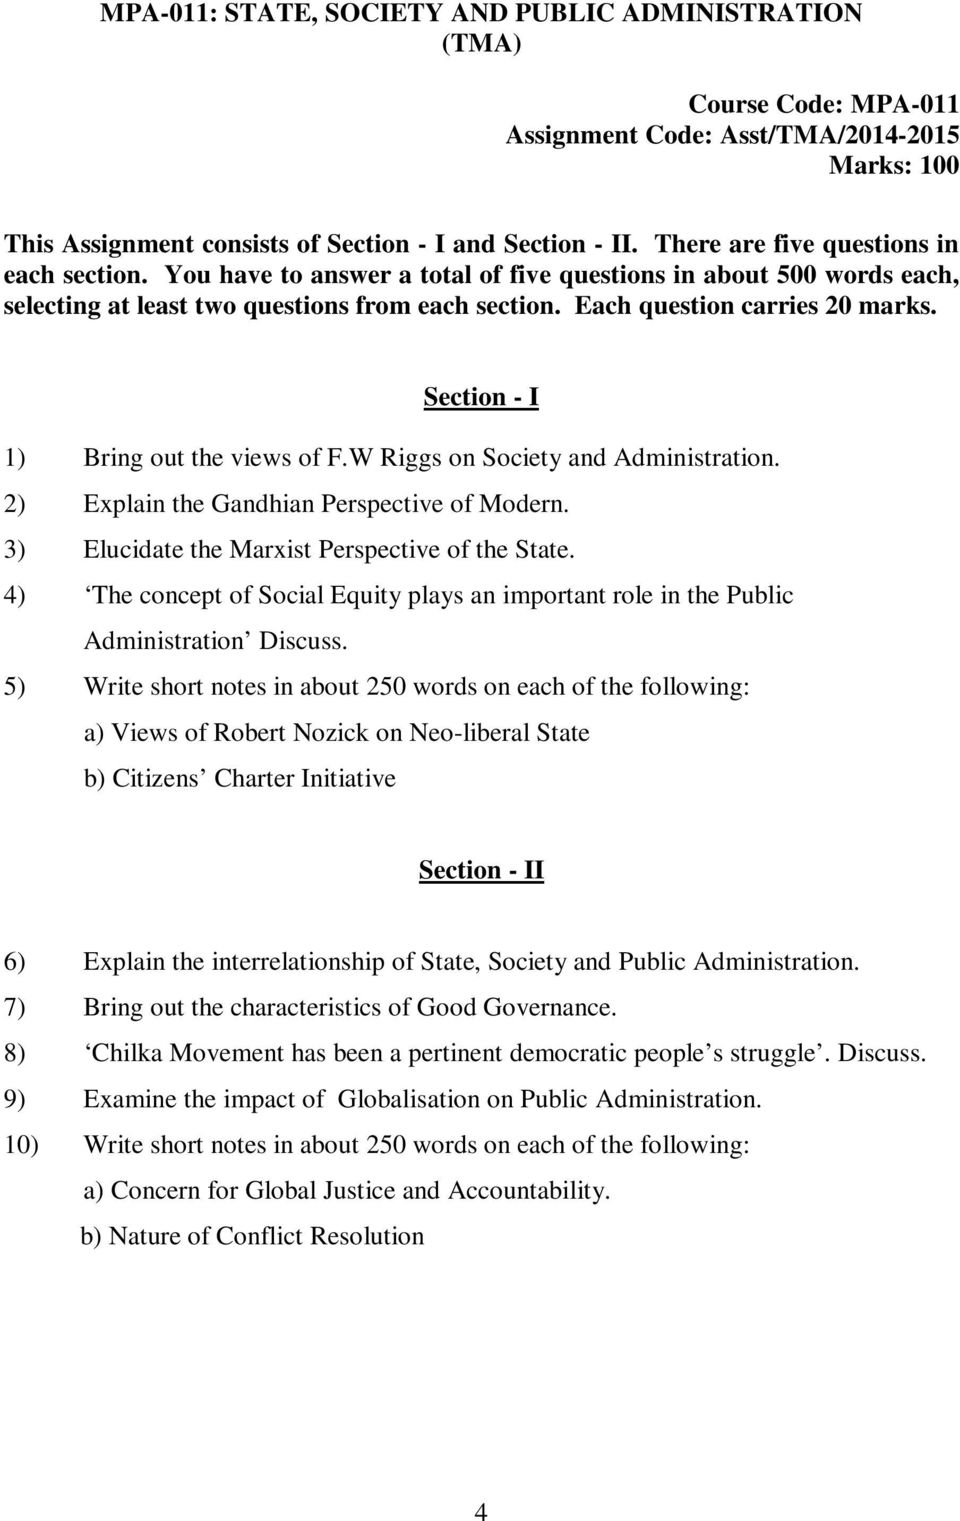 Section - I 1) Bring out the views of F.W Riggs on Society and Administration. 2) Explain the Gandhian Perspective of Modern. 3) Elucidate the Marxist Perspective of the State.